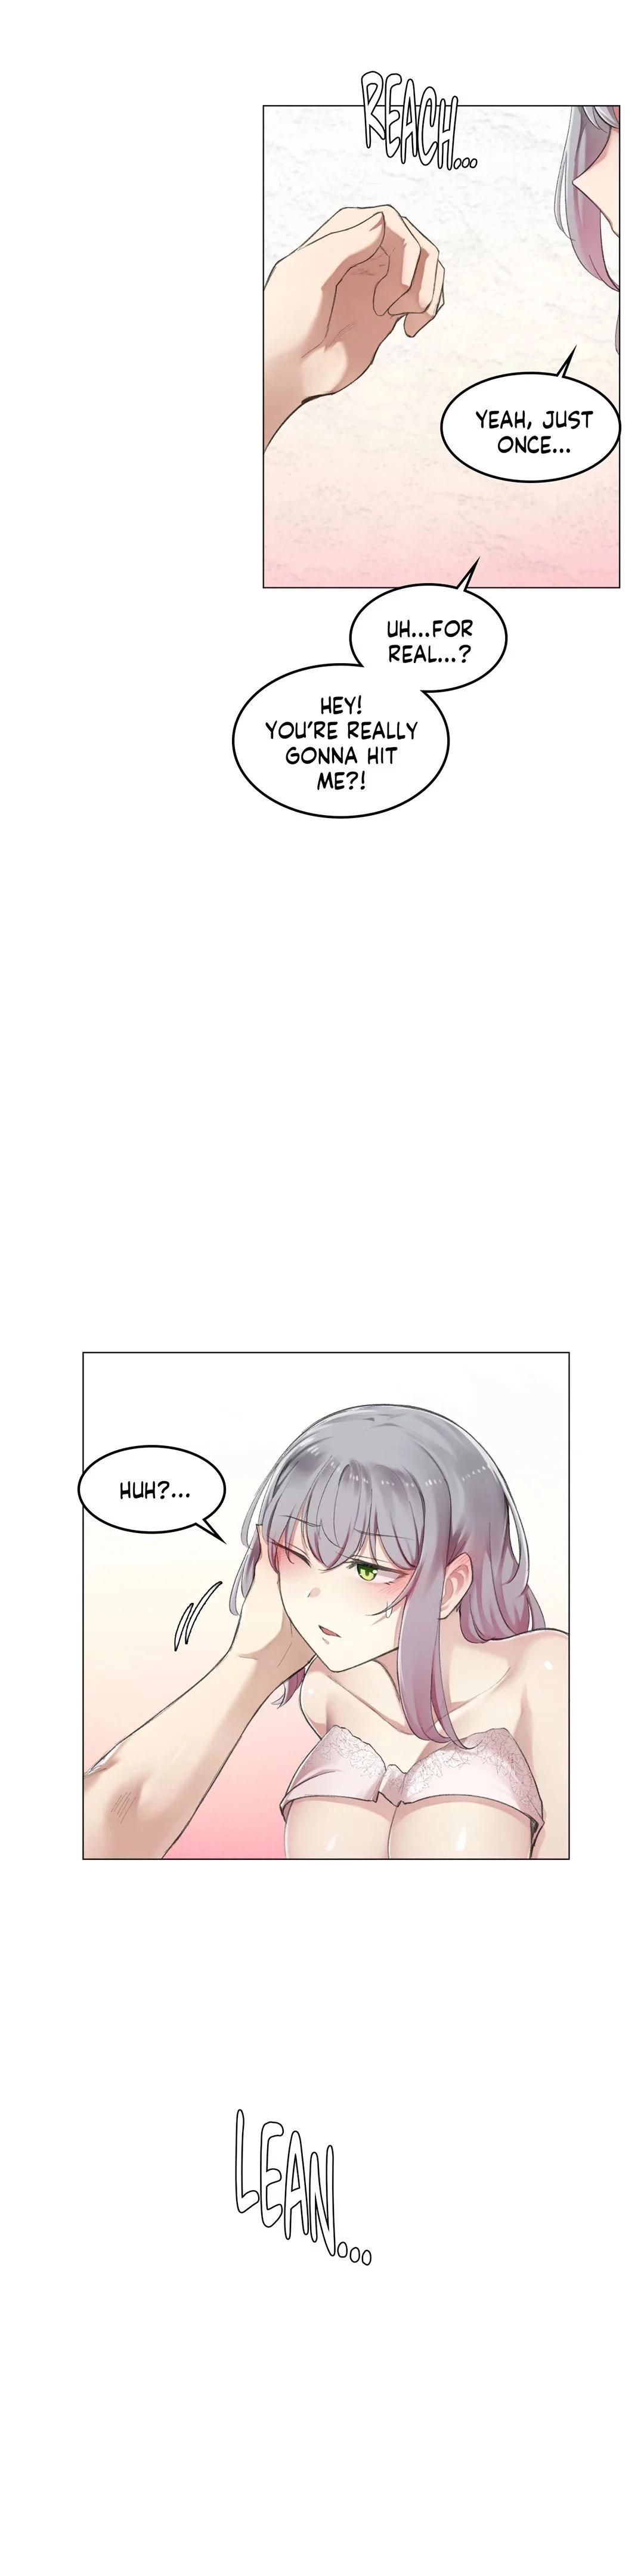 [Dumangoon, KONG_] Sexcape Room: Snap Off Ch.7/7 [English] [Manhwa PDF] Completed 190